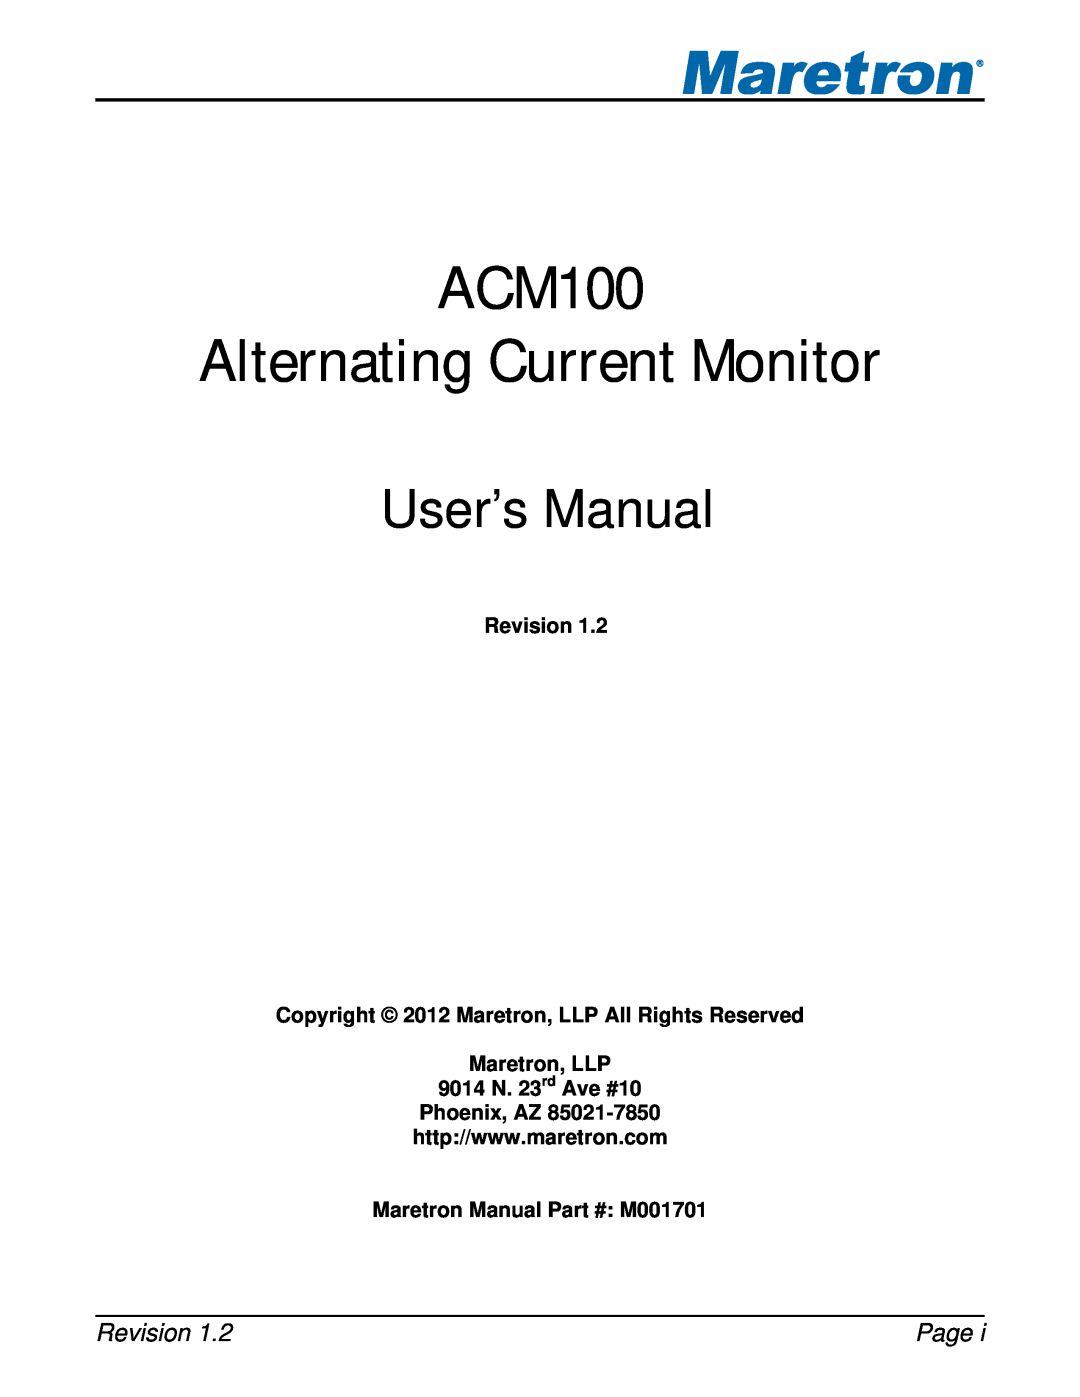 Maretron ACM100 user manual Page, Revision Copyright 2012 Maretron, LLP All Rights Reserved, Maretron Manual M001701 